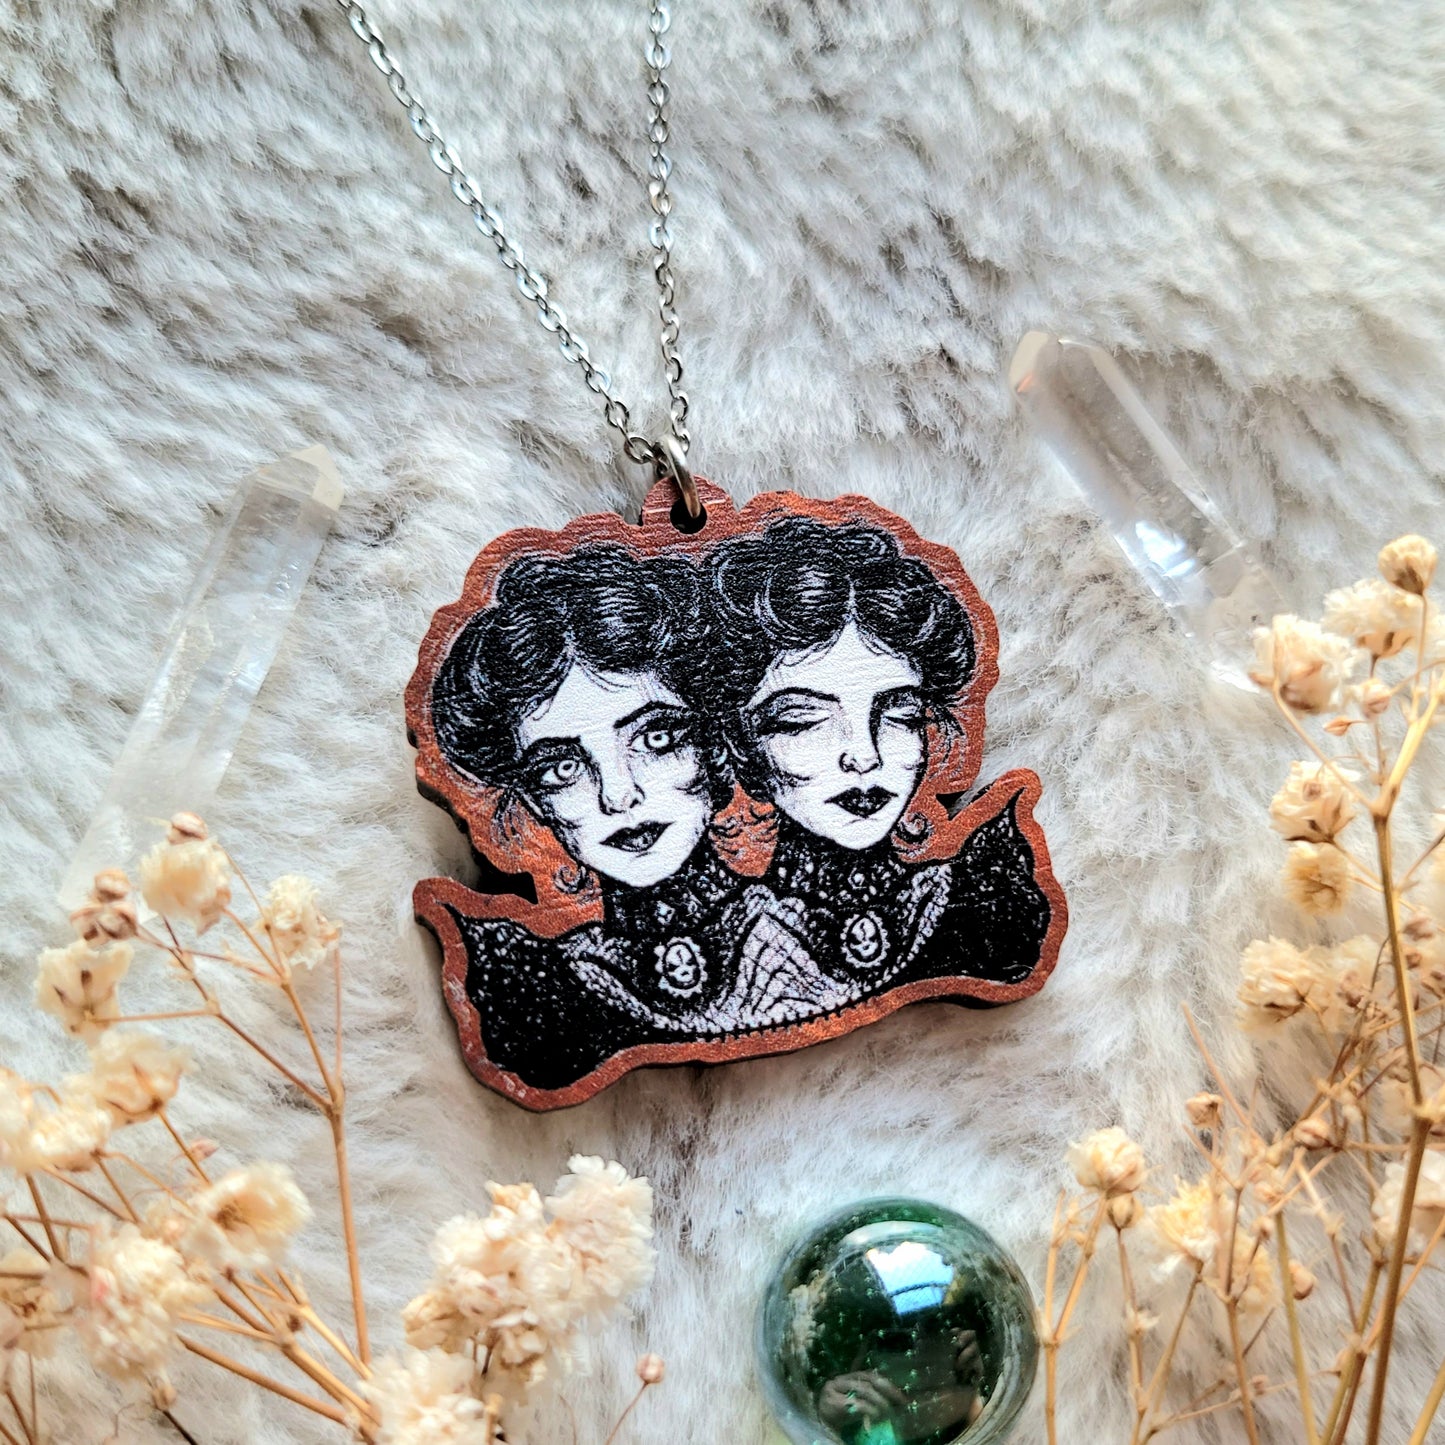 Conjoined Victorian Twins Illustrated necklace, responsibly sourced cherry wood, chain options available, by Grace Moth